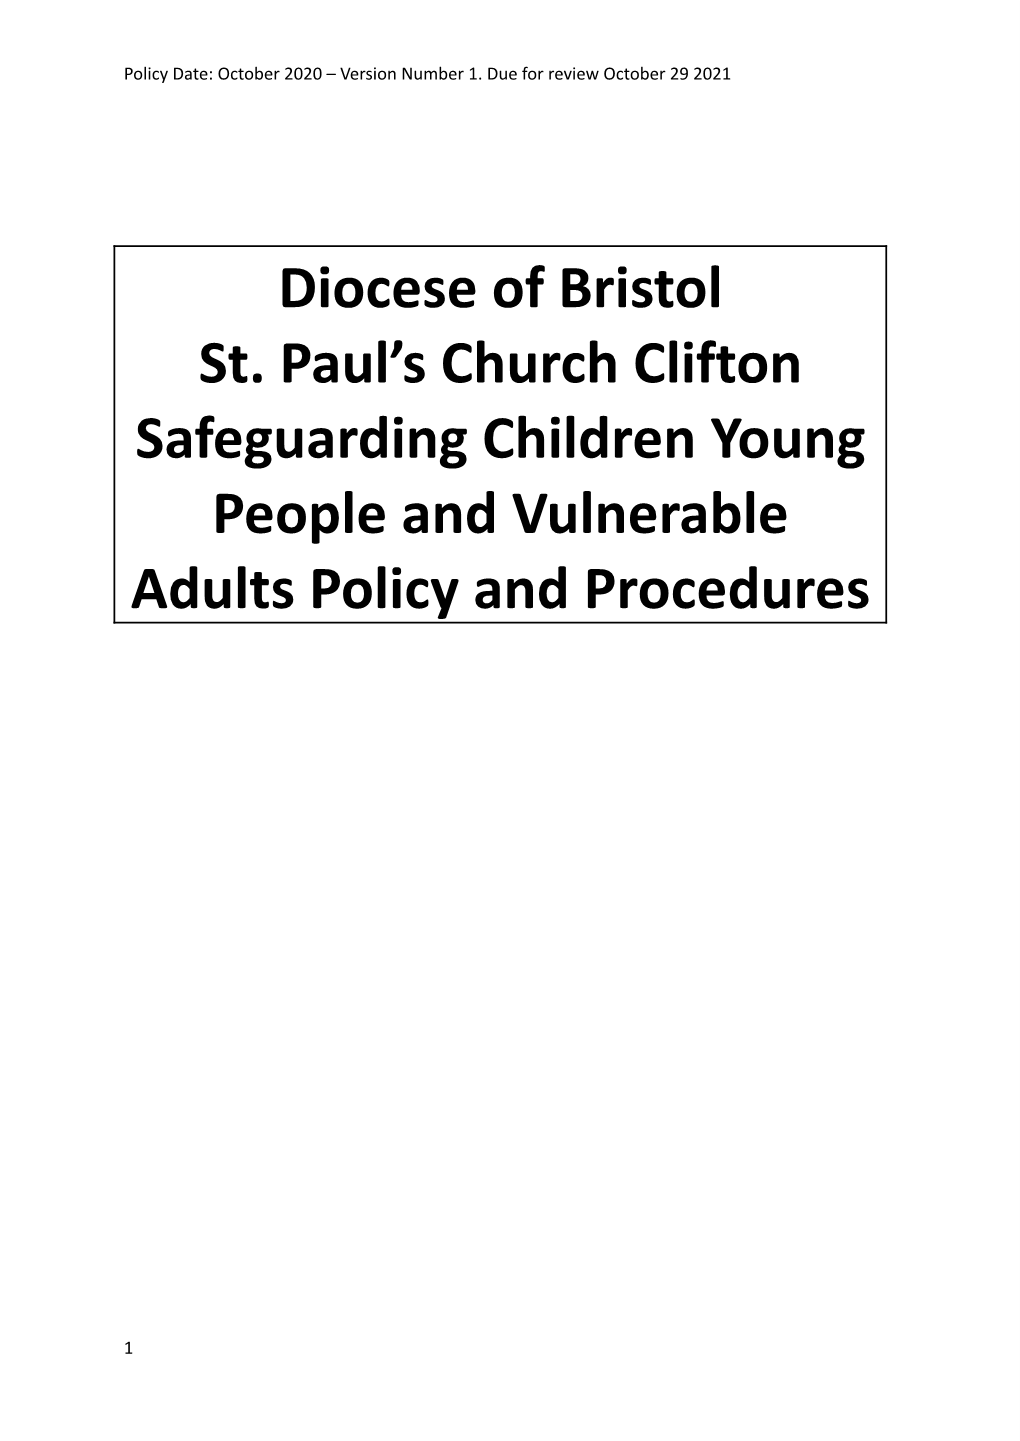 St Paul's Safeguarding Policy 2020